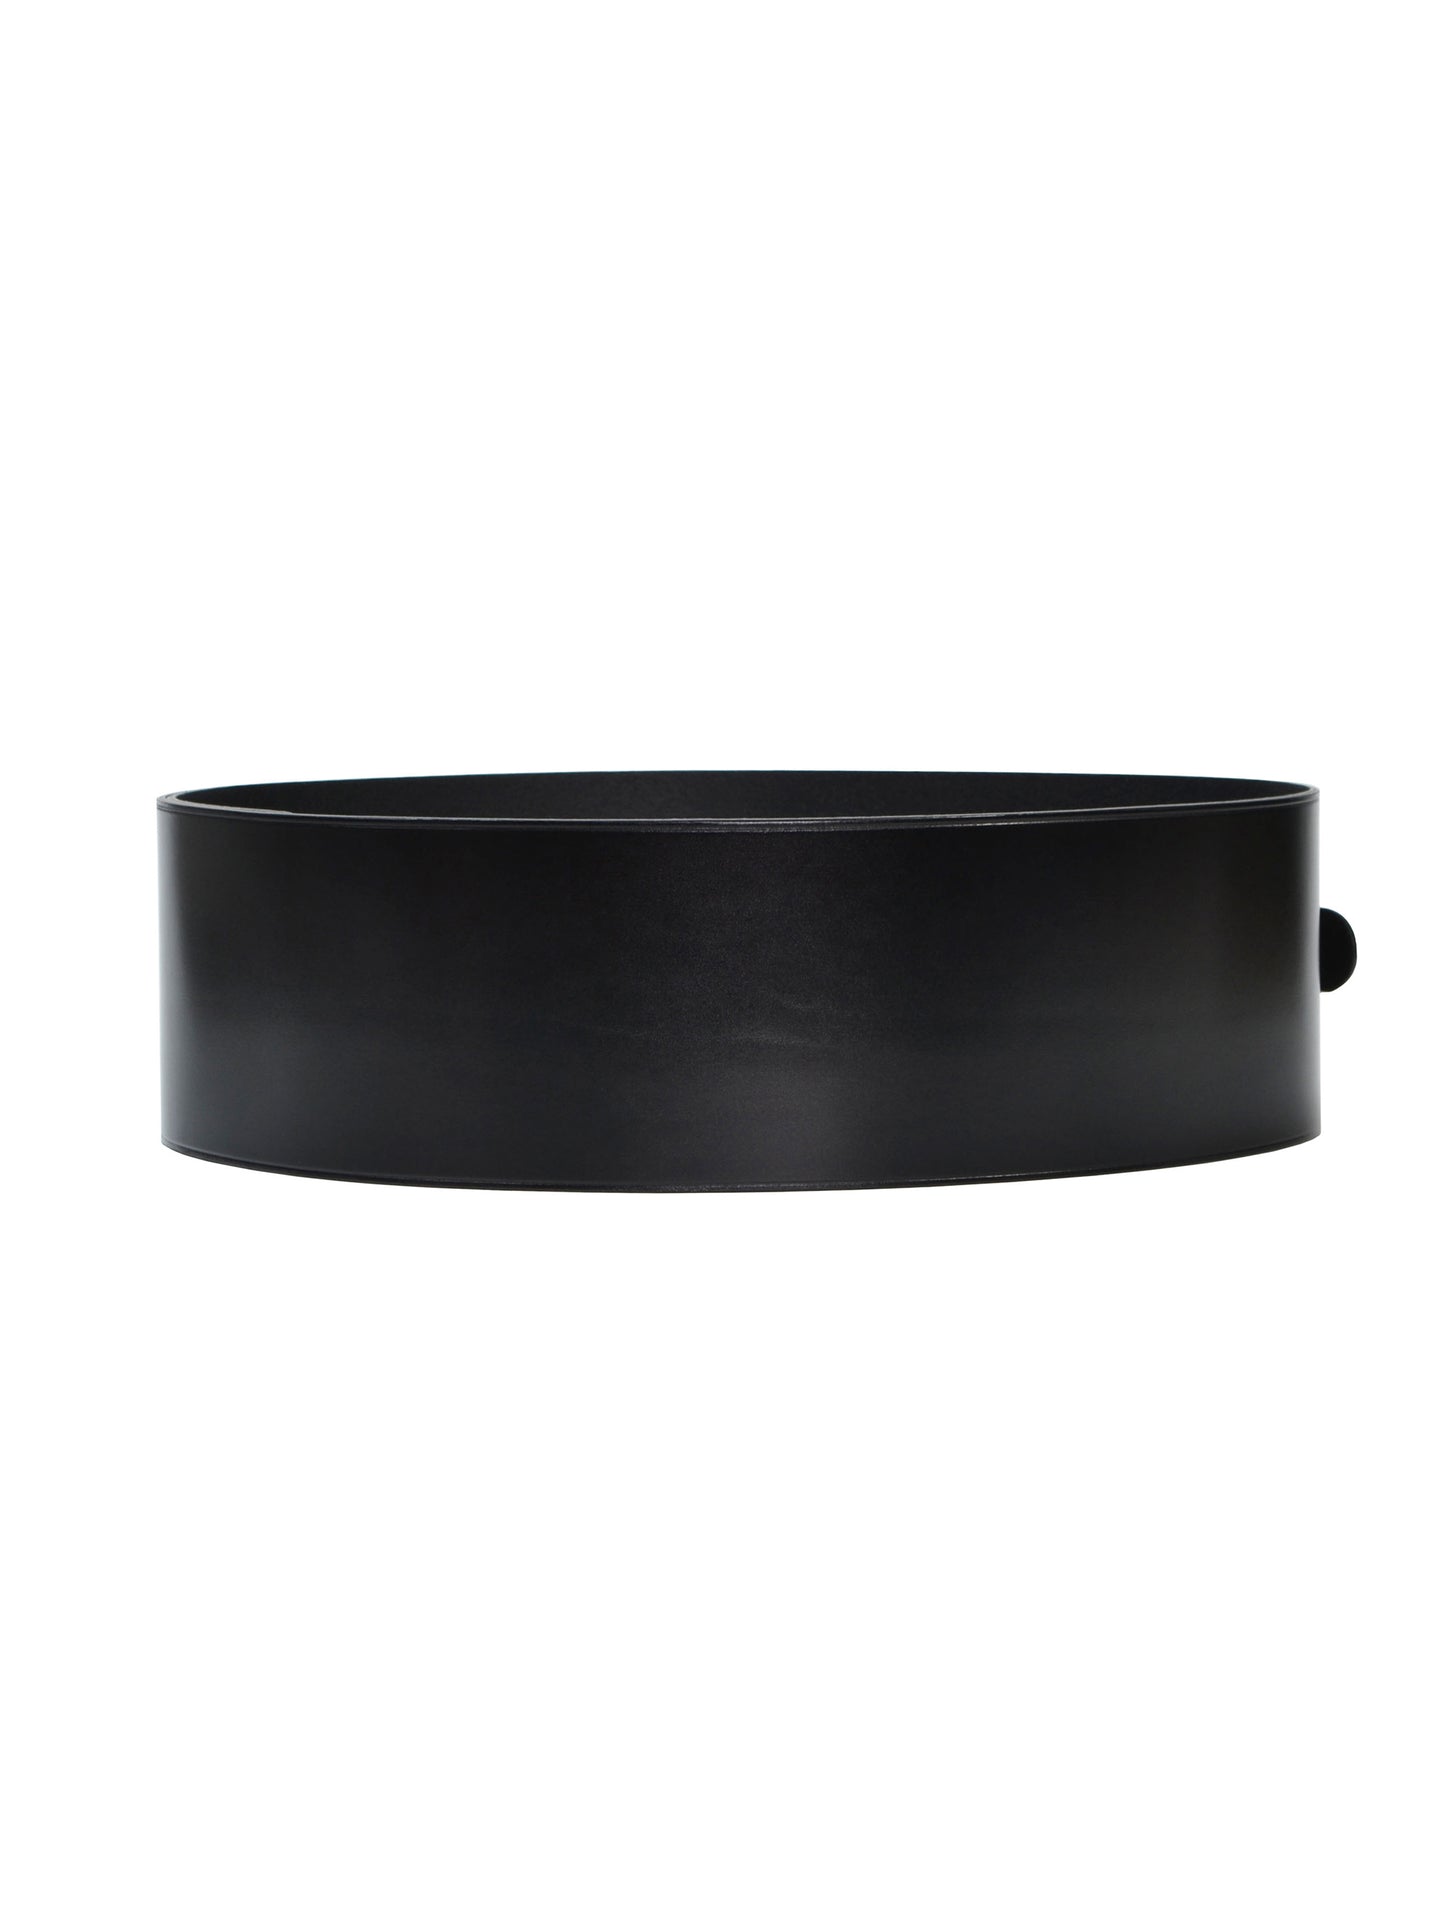 Back view of wide leather belt for women.